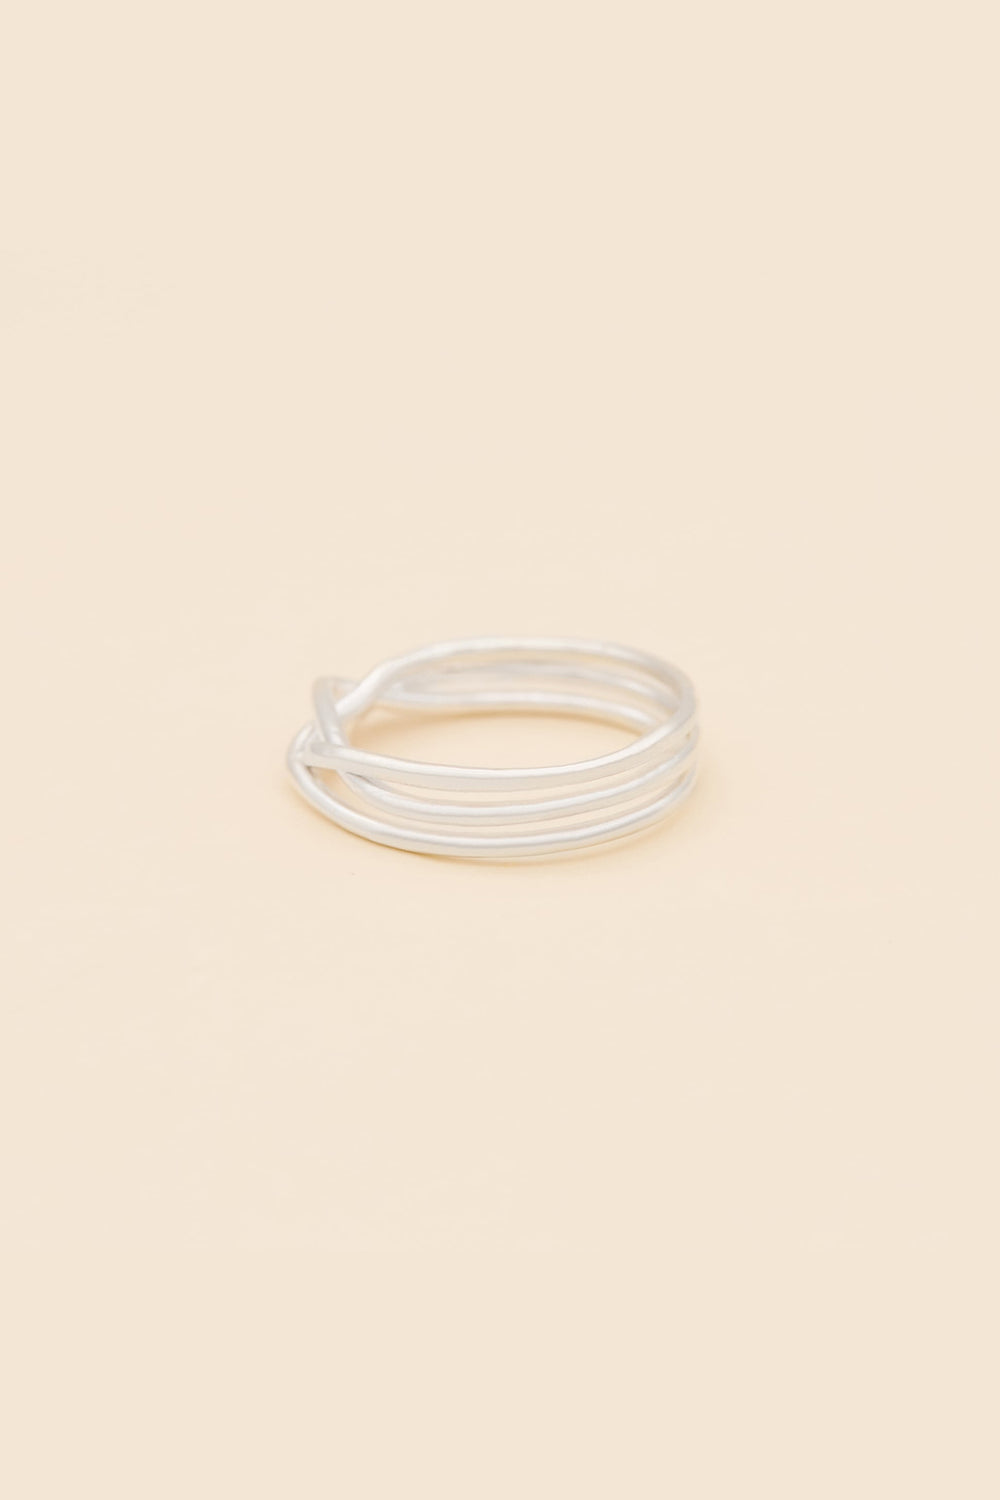 Sprout / SP-R28 / RING